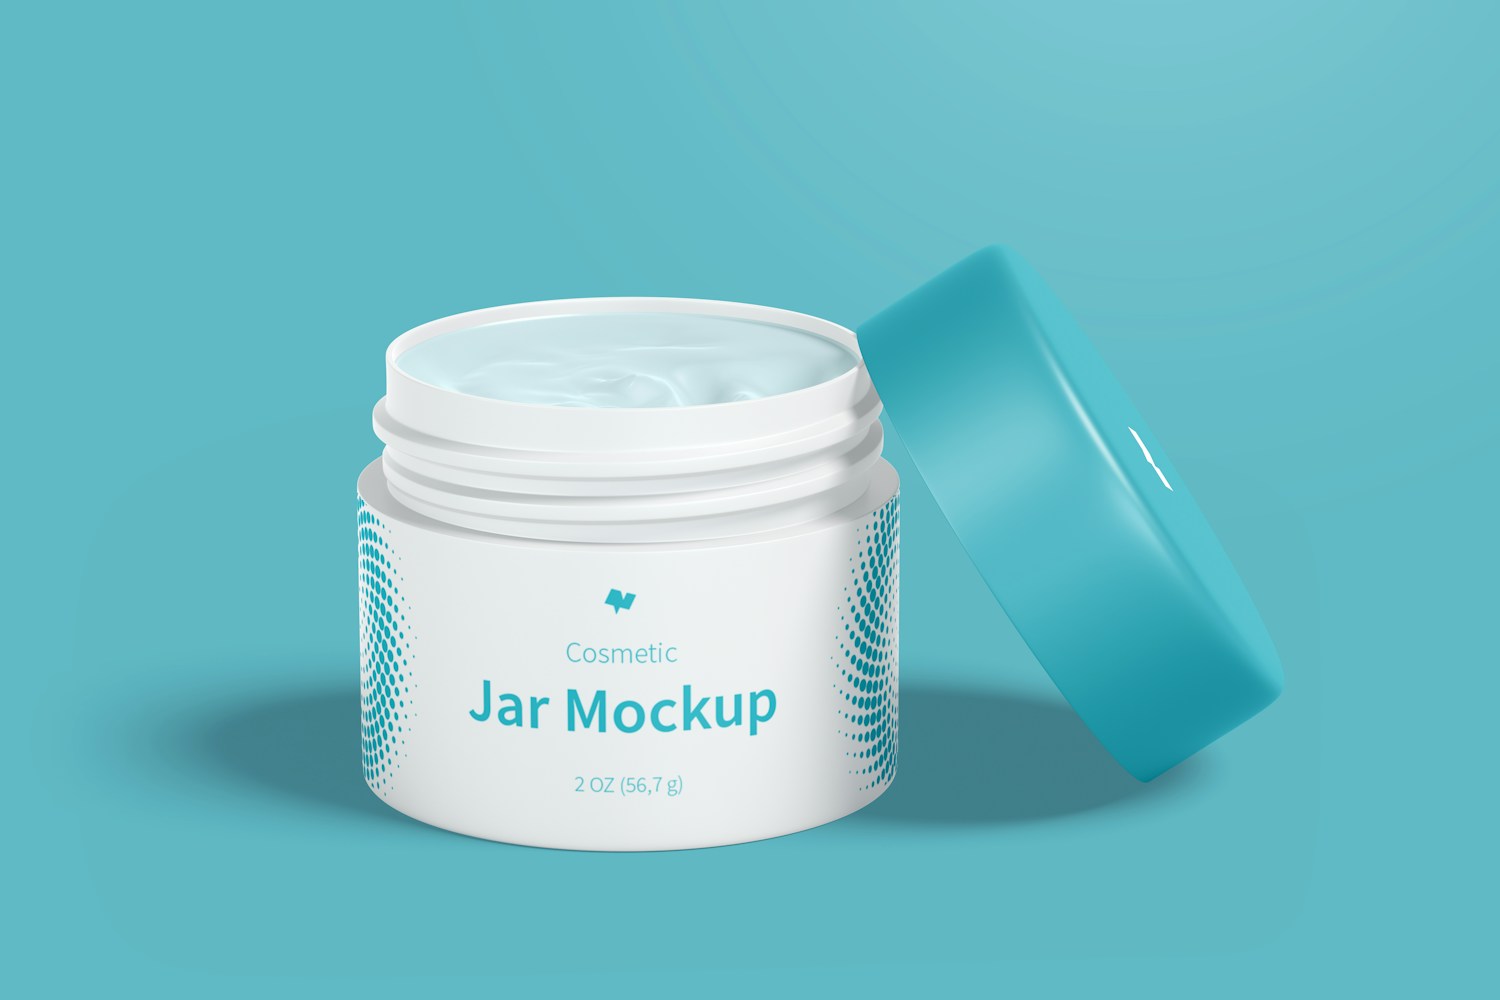 Cosmetic Jar Mockup, Front View 04